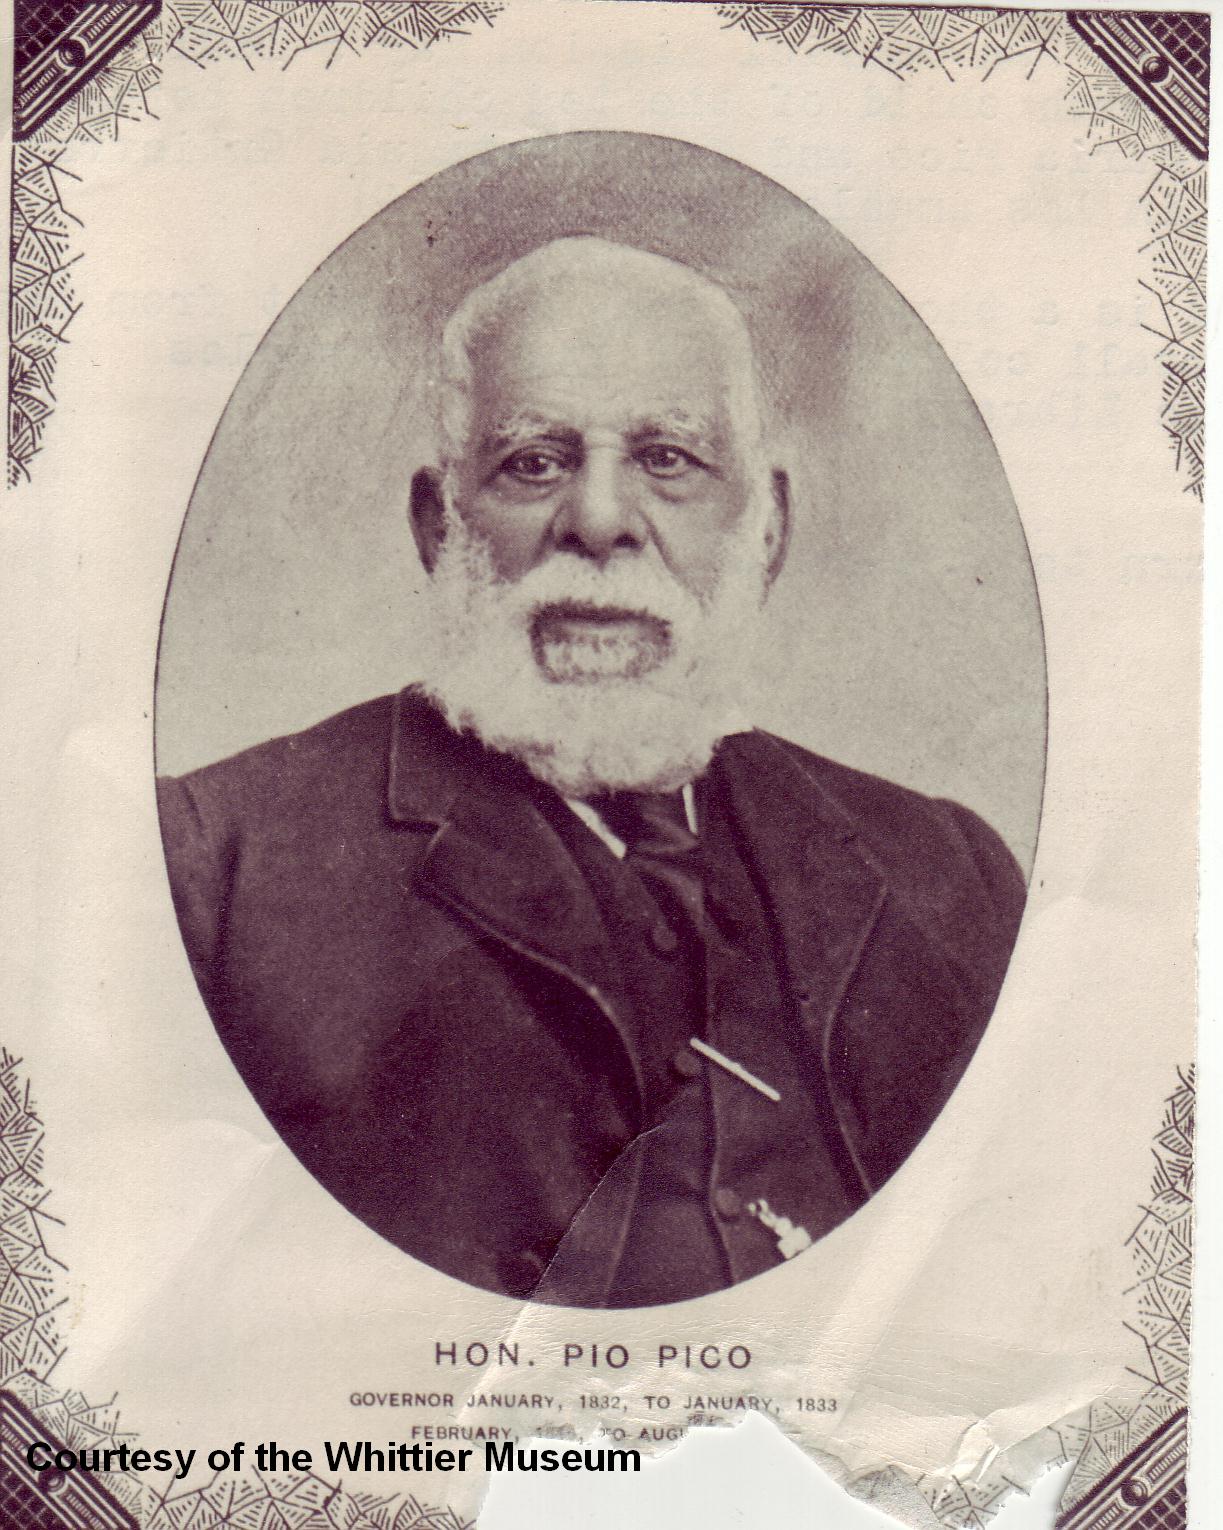 Portrait of Hon. Pio Pico.  Governor January, 1832 to January, 1833.  (Second term is listed on the photograph but is unreadable.)